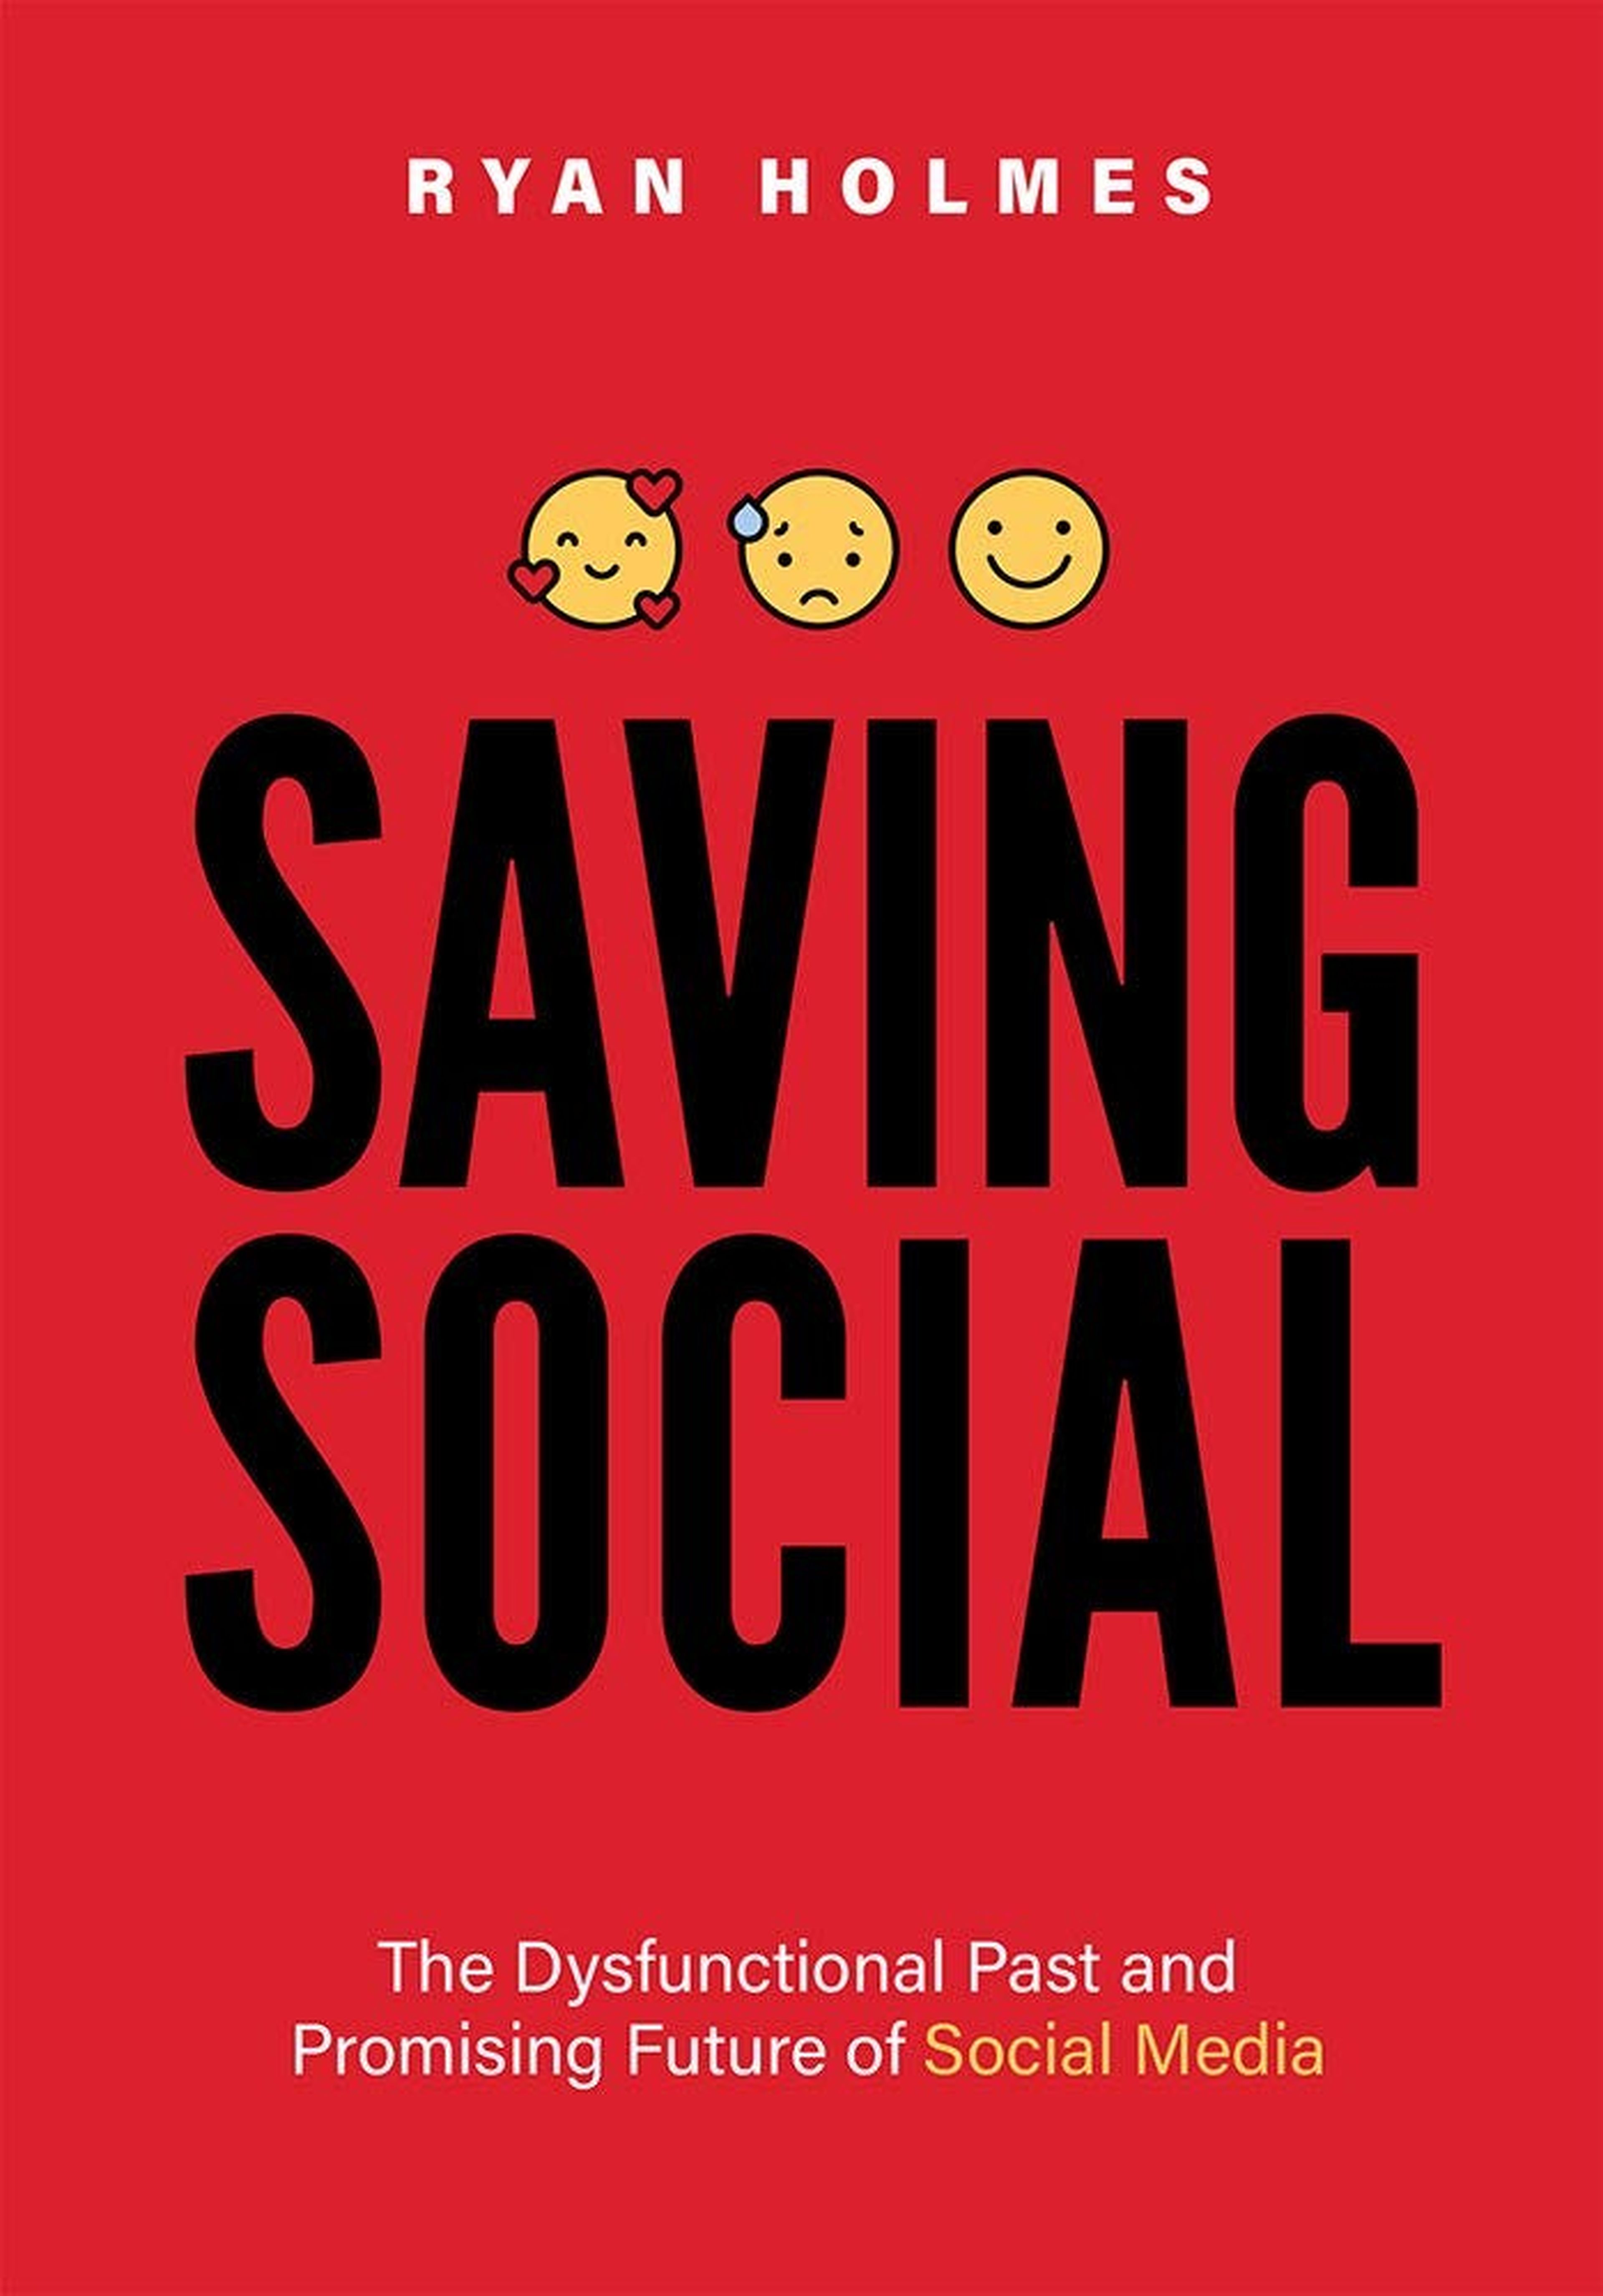 'Saving Social: The Dysfunctional Past and Promising Future of Social Media'